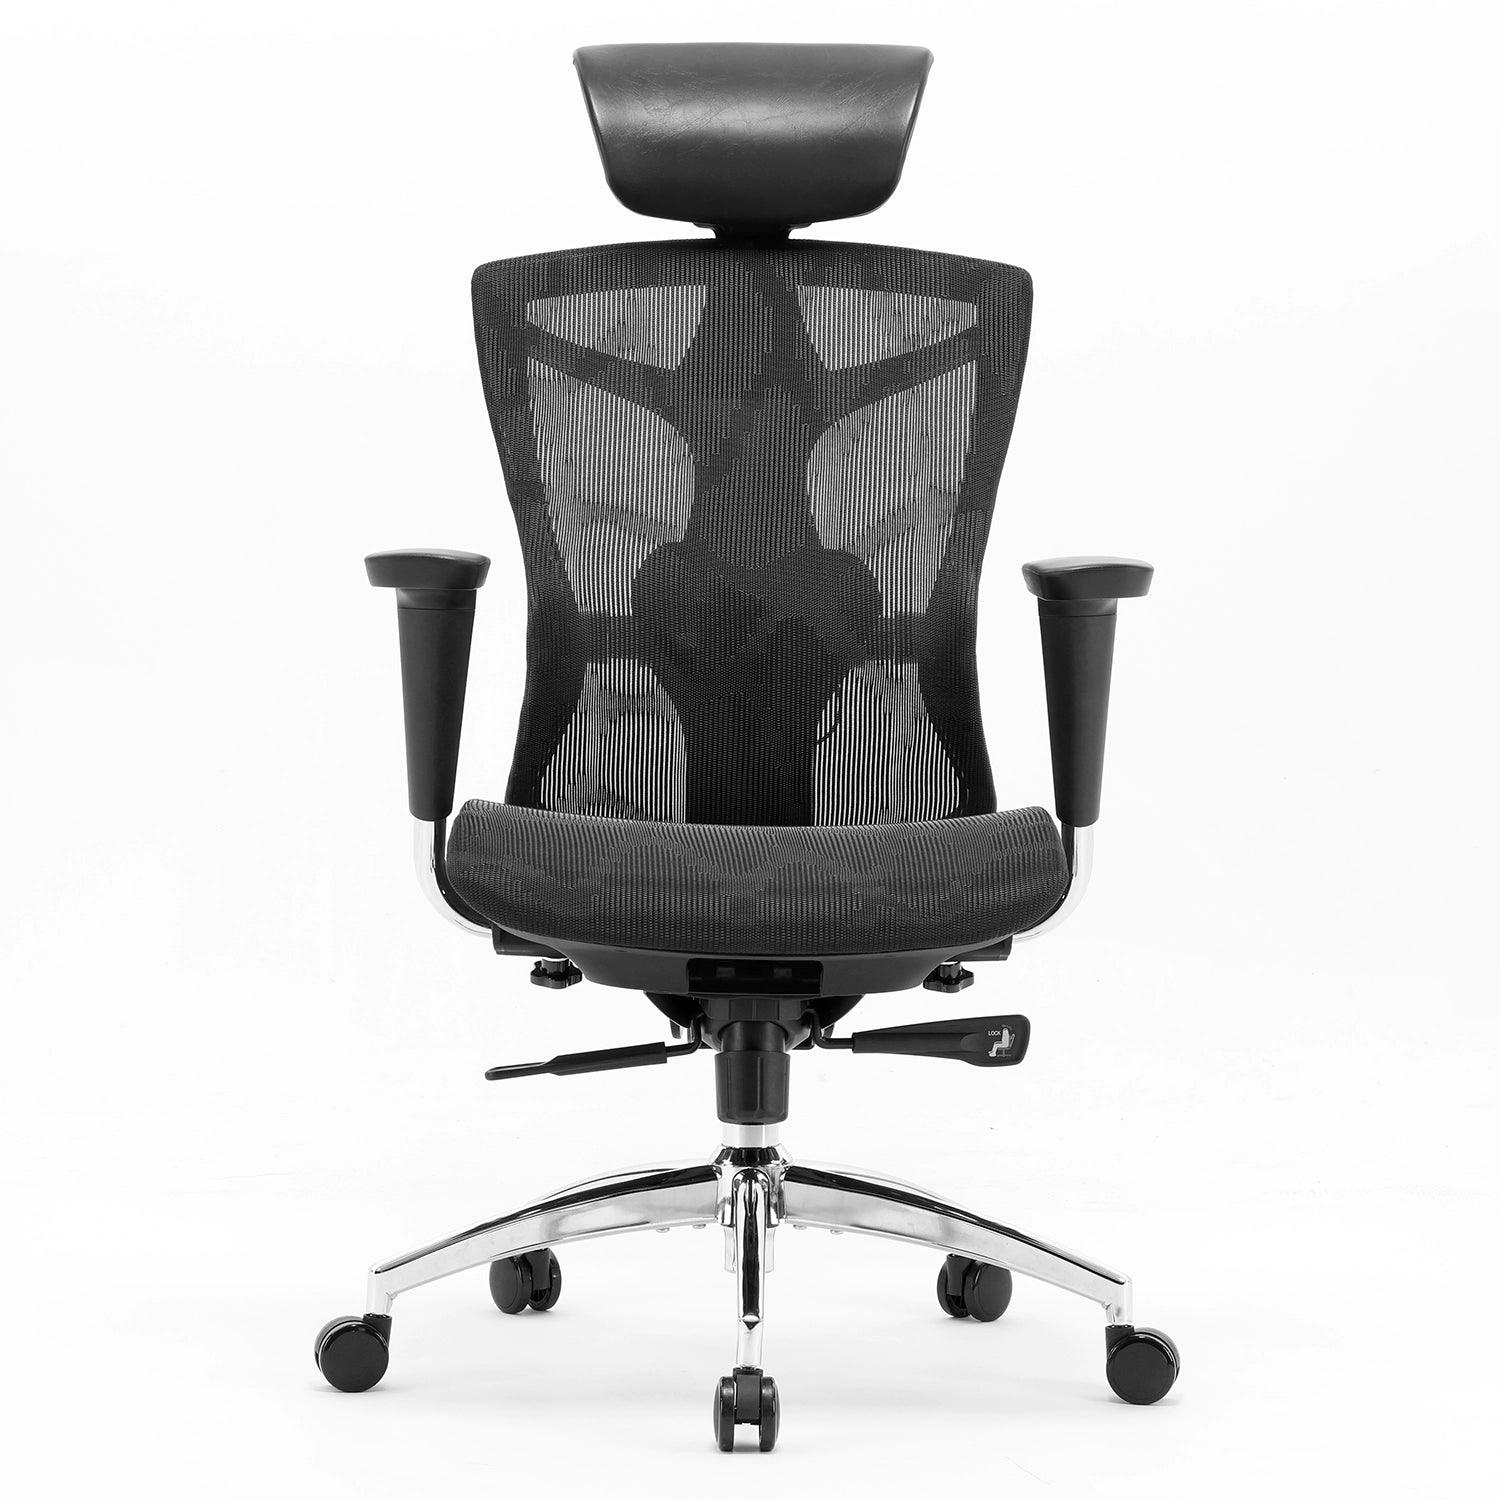 Sihoo V1 Highly Adjustable Executive Chair Combined with Ergonomics and Innovation - Official US Sihoo Store